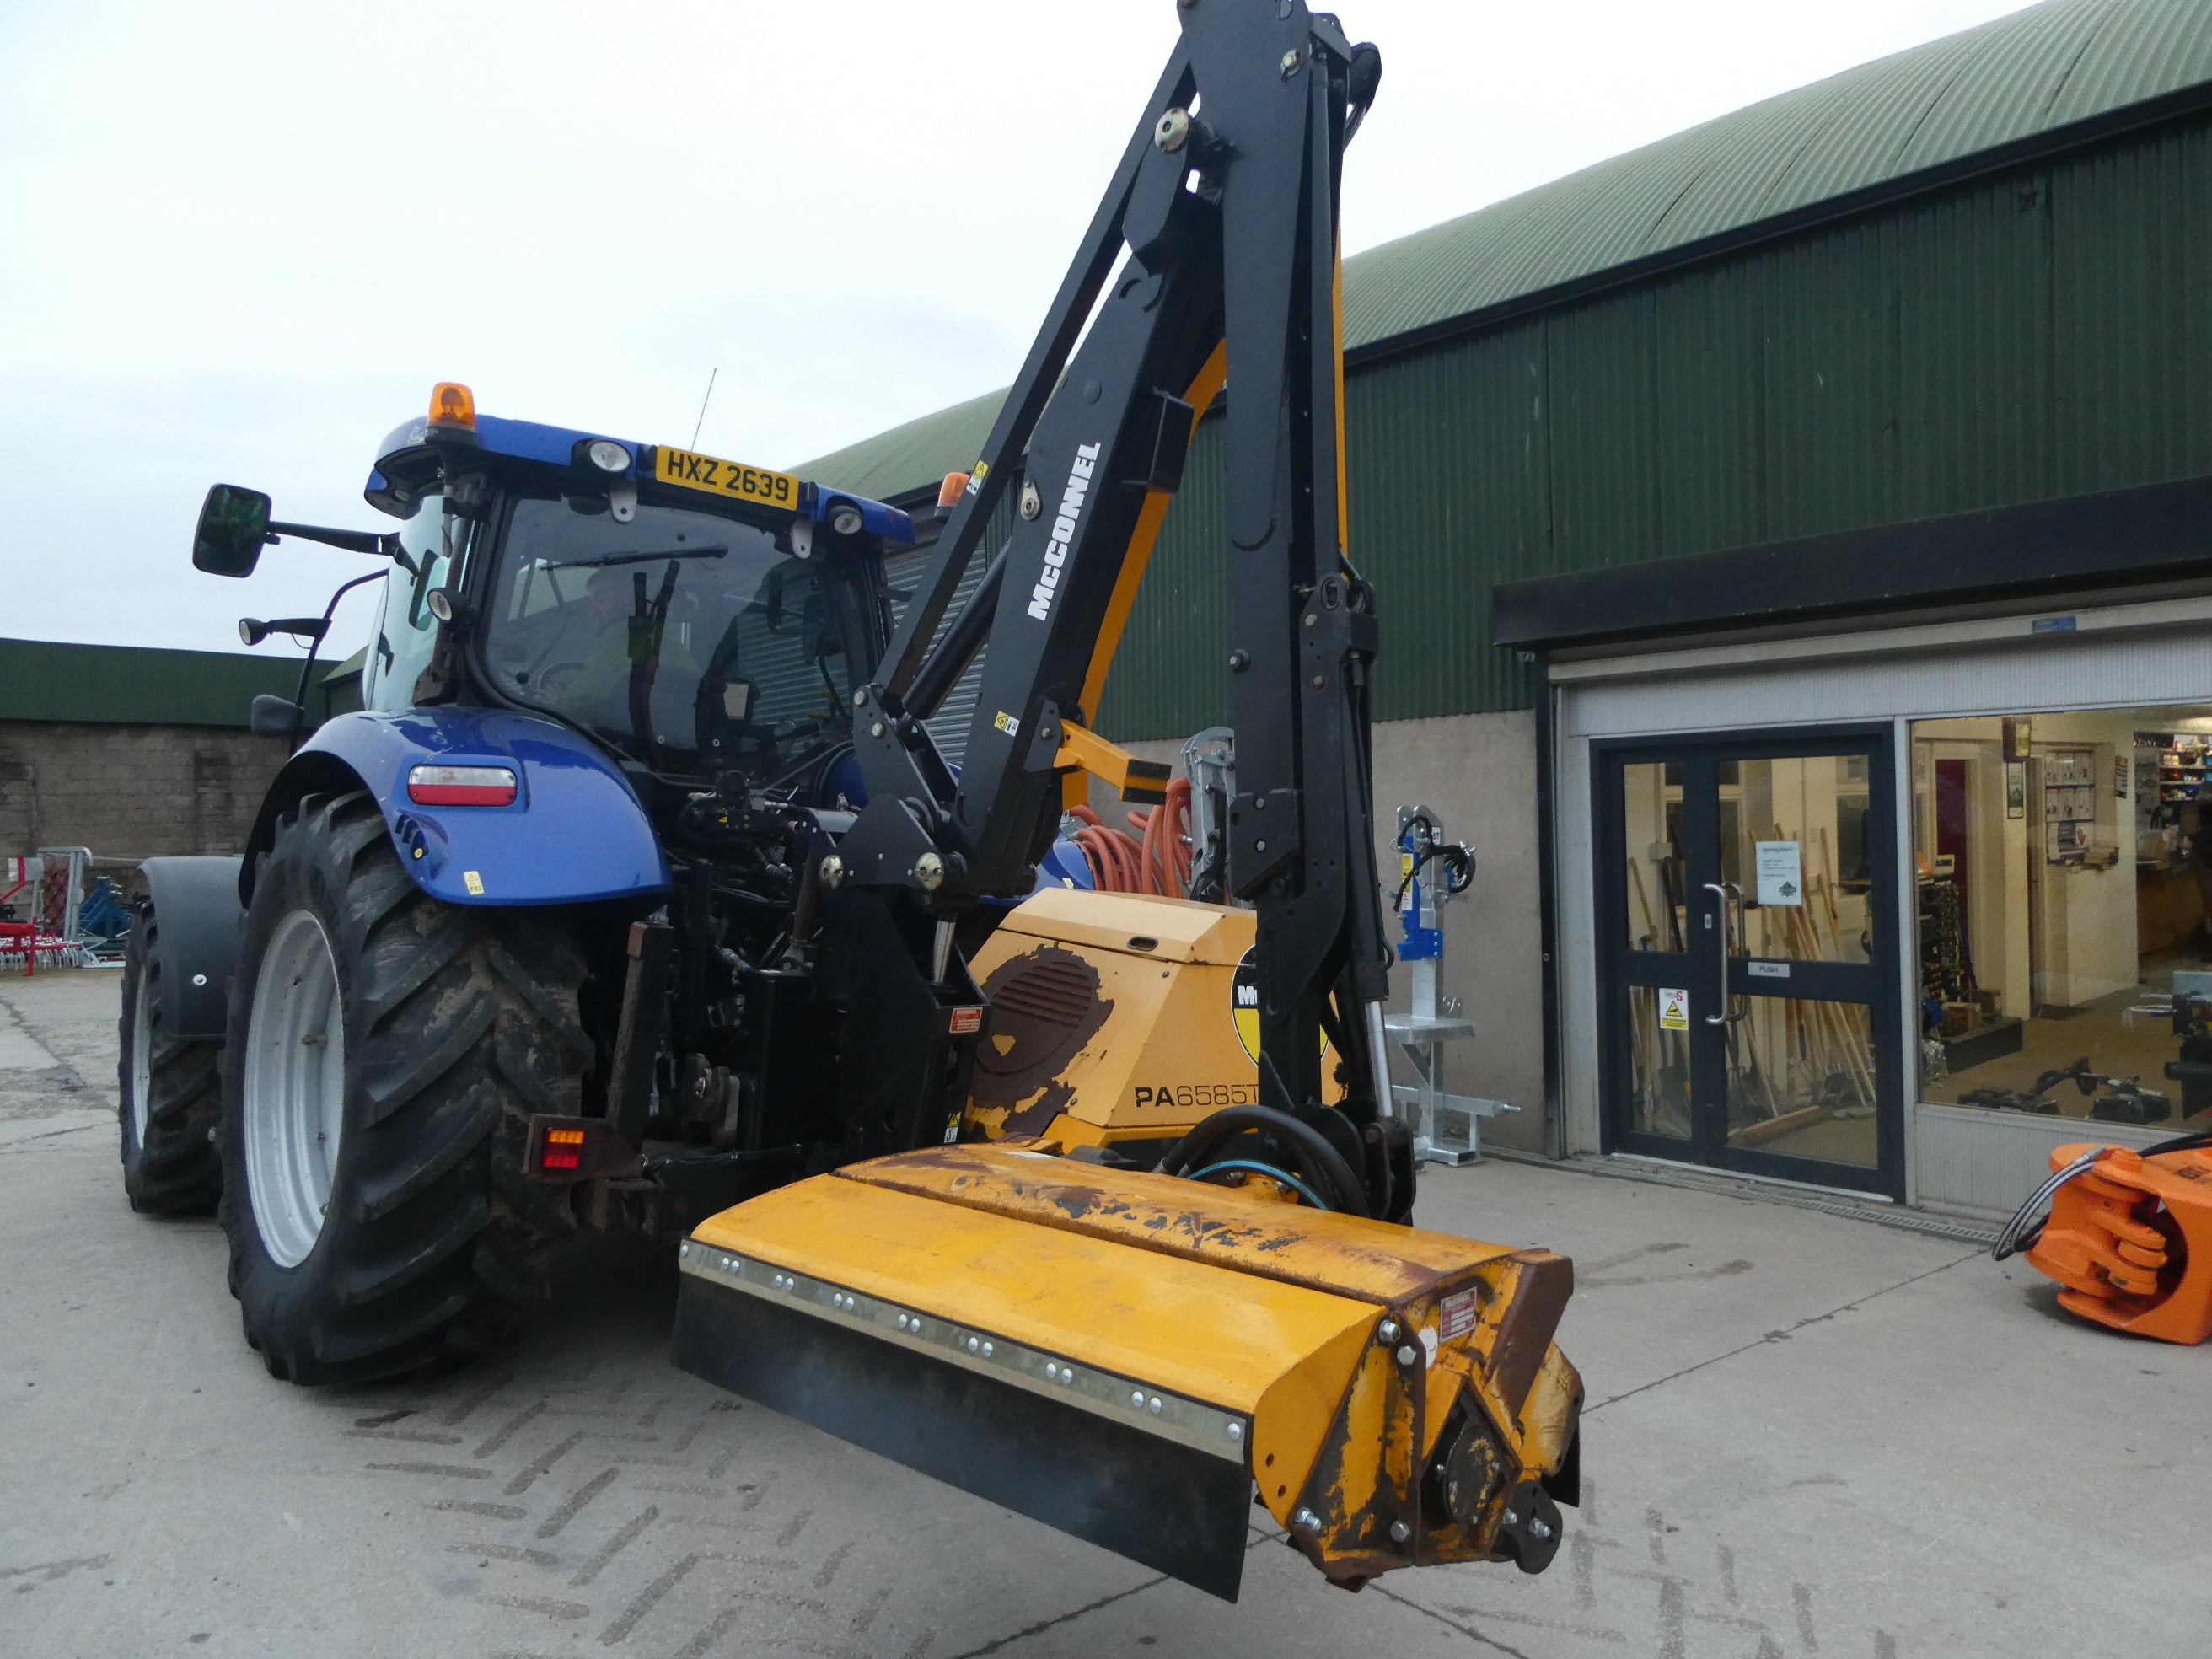 Mcconnel PA6585T Hedgecutter